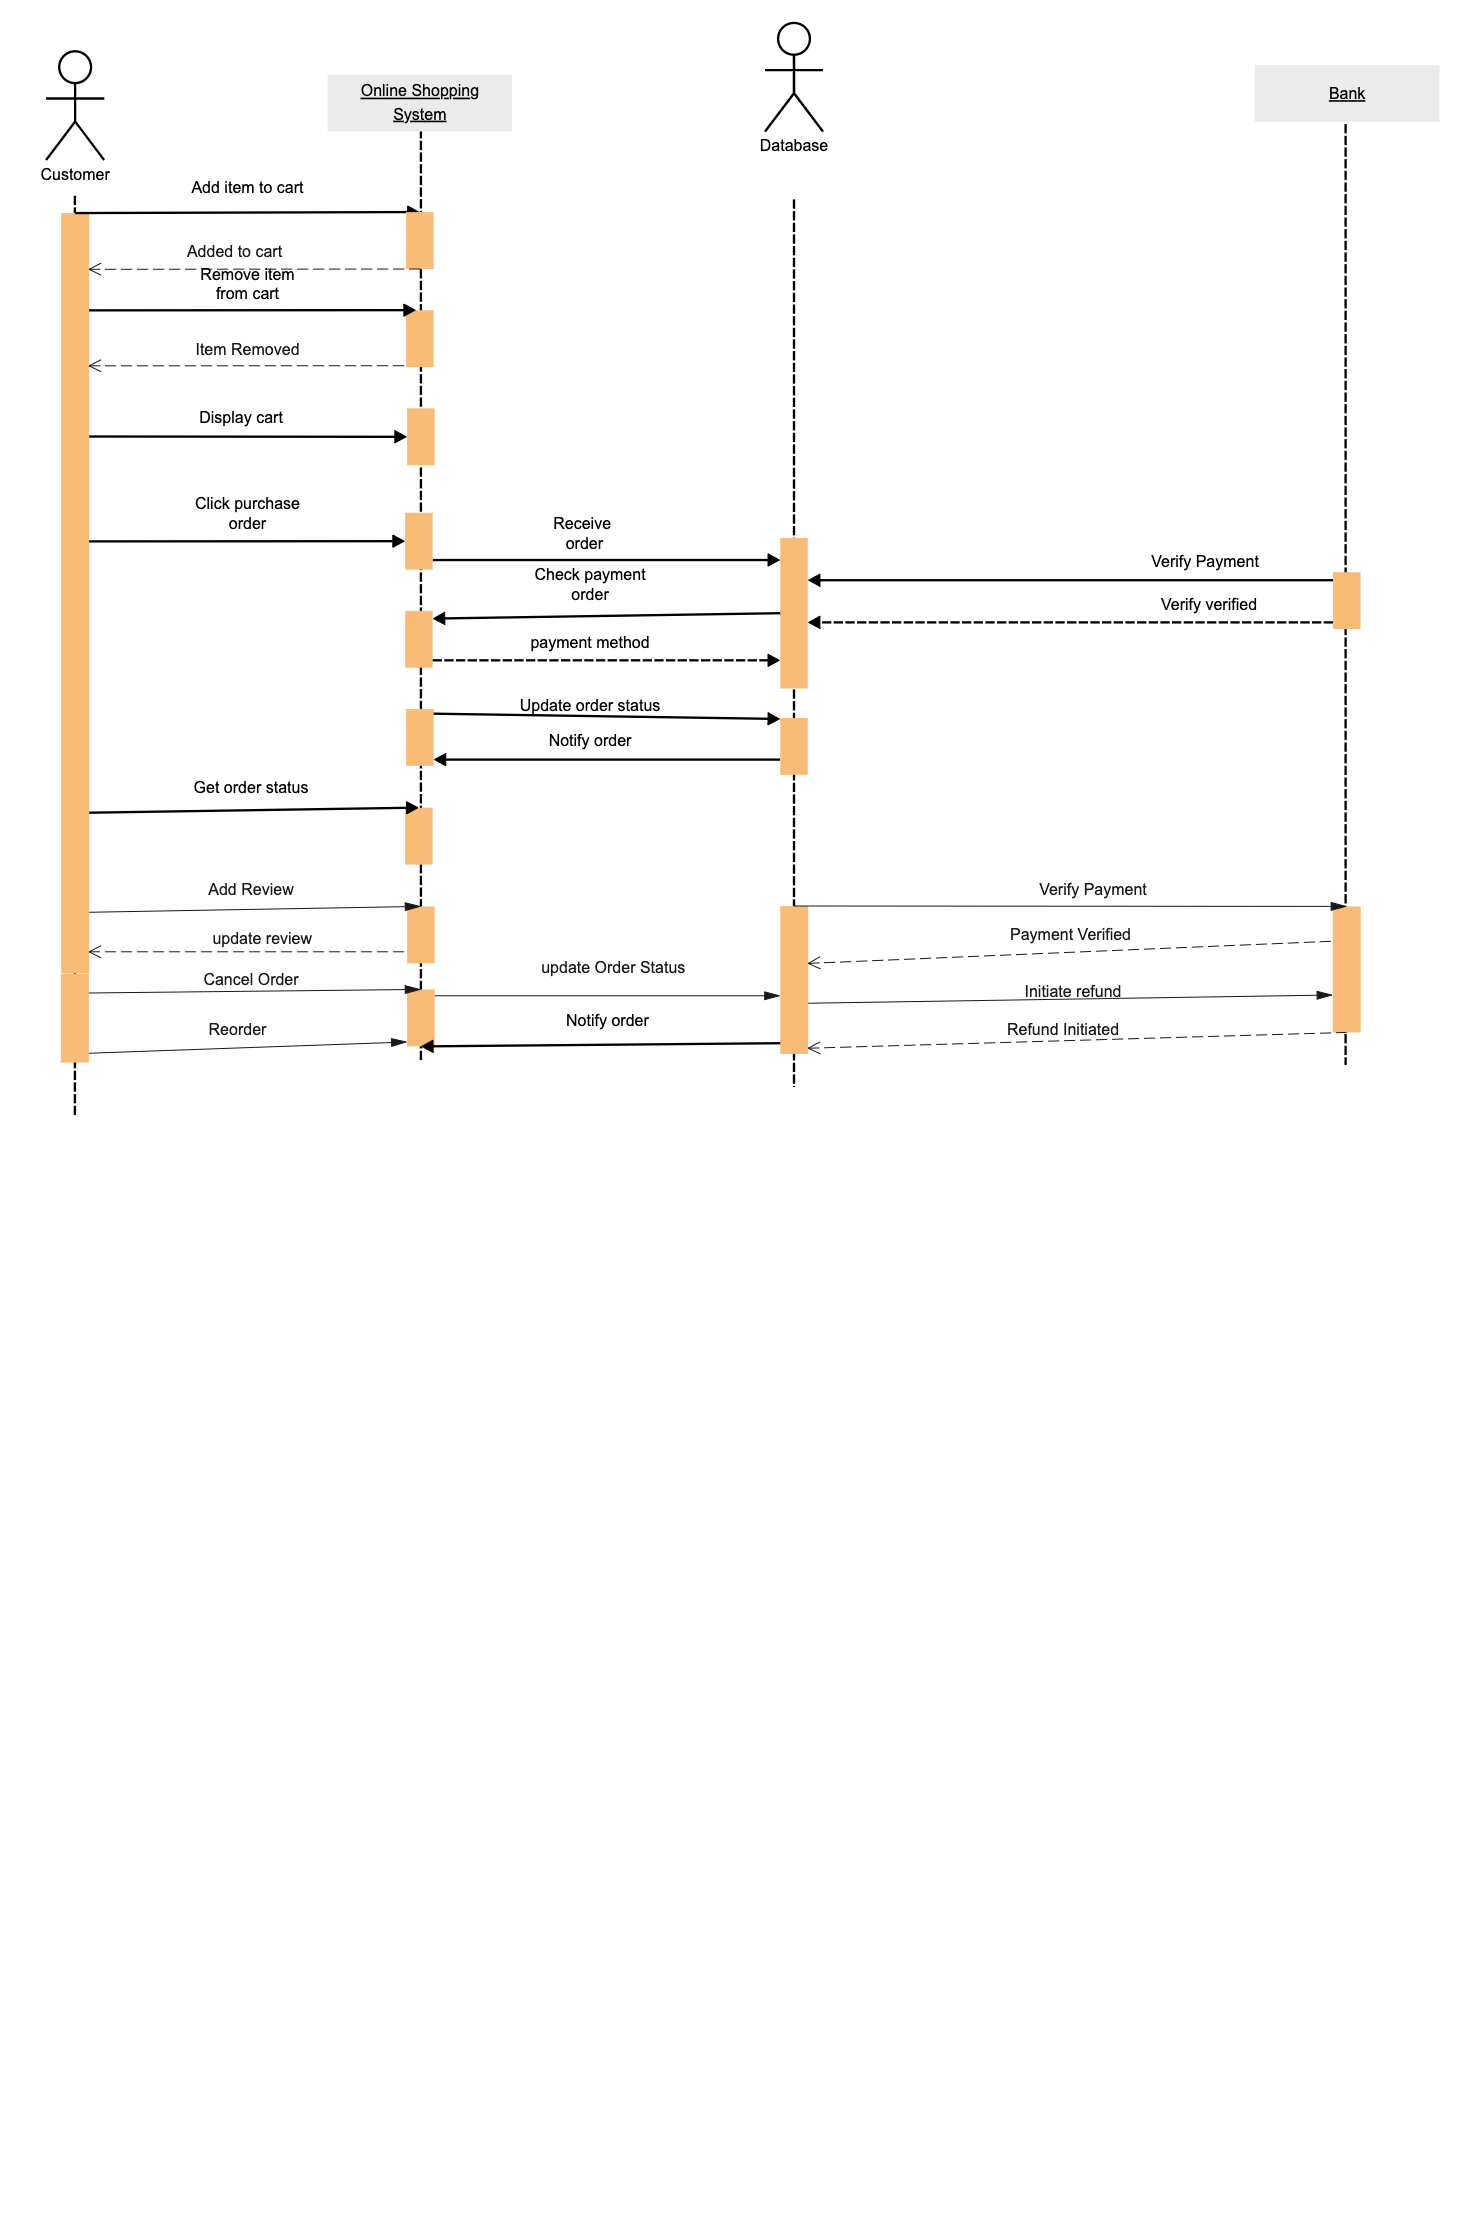 UML Sequence Diagram for Online Shopping System